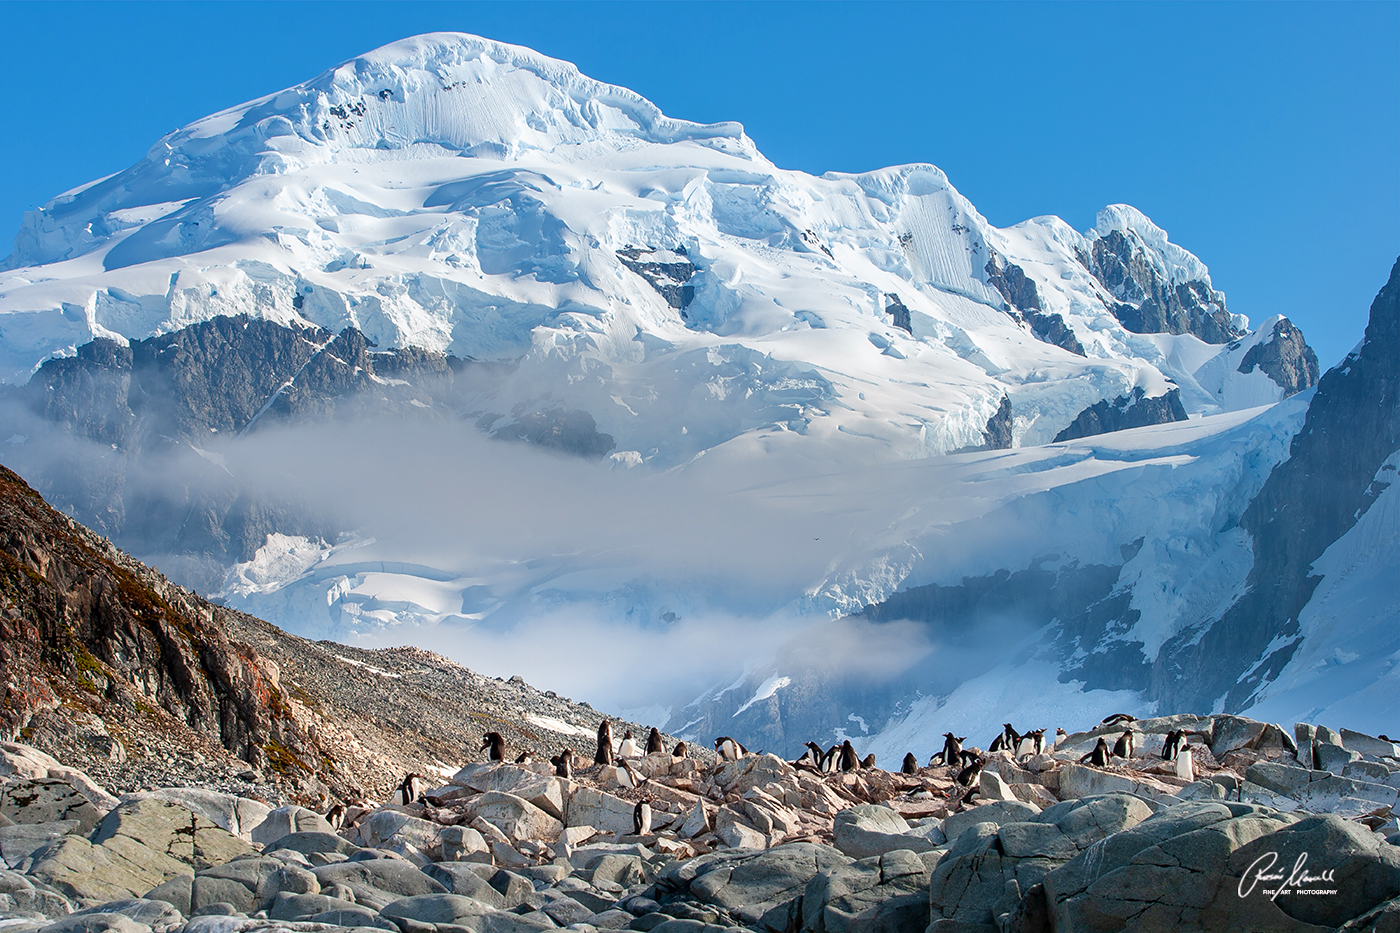 A chinstrap penguin (Pygoscelis antarctica) colony on Cuverville Island against a beautiful and icy backdrop.